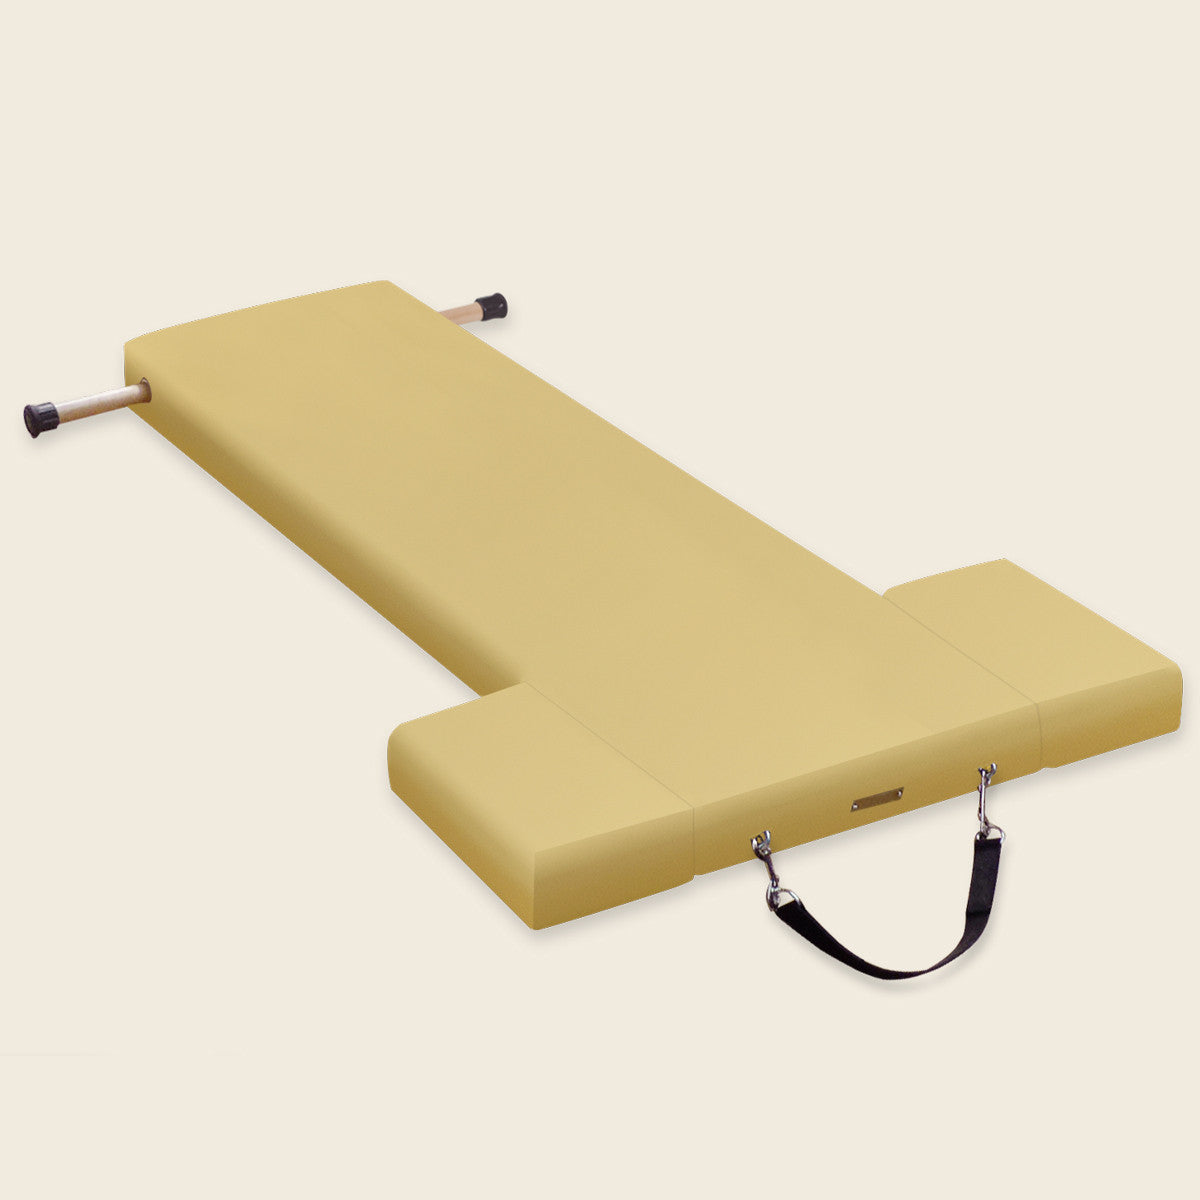 View All Our Products Gratz™ Pilates Industries, 46% OFF